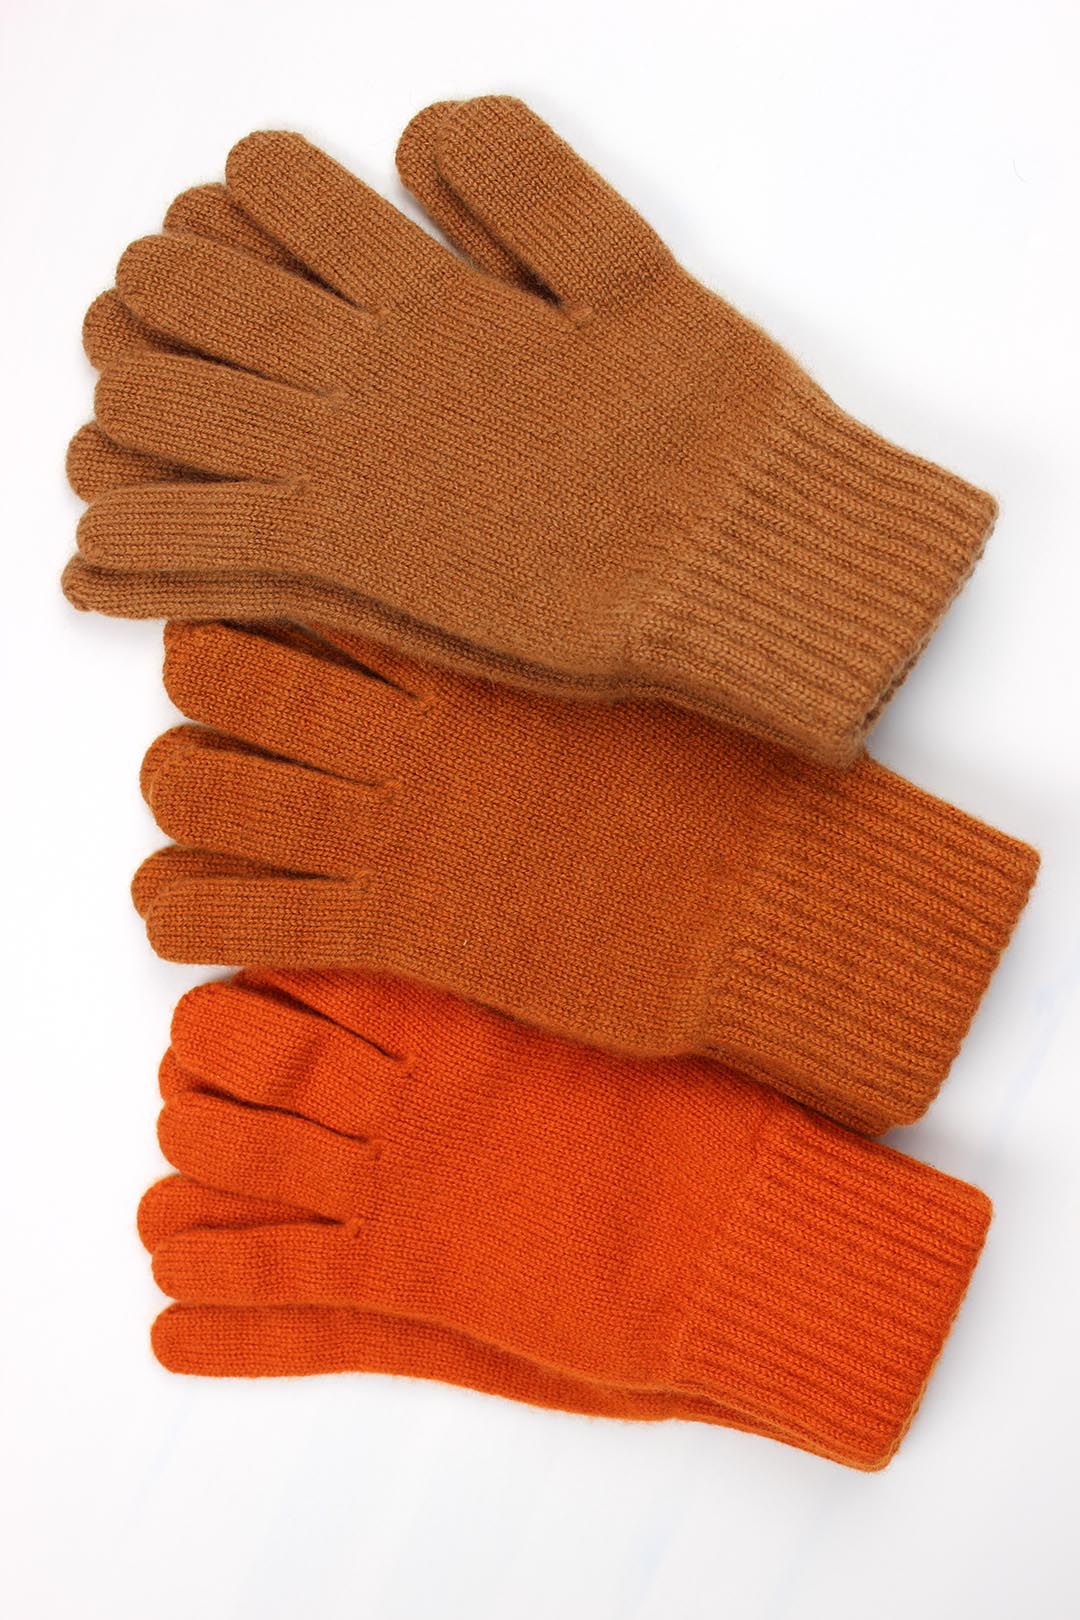 Cashmere gloves in orange shades cinnamon, ginger and pumpkin. Knitted in the Scottish borders